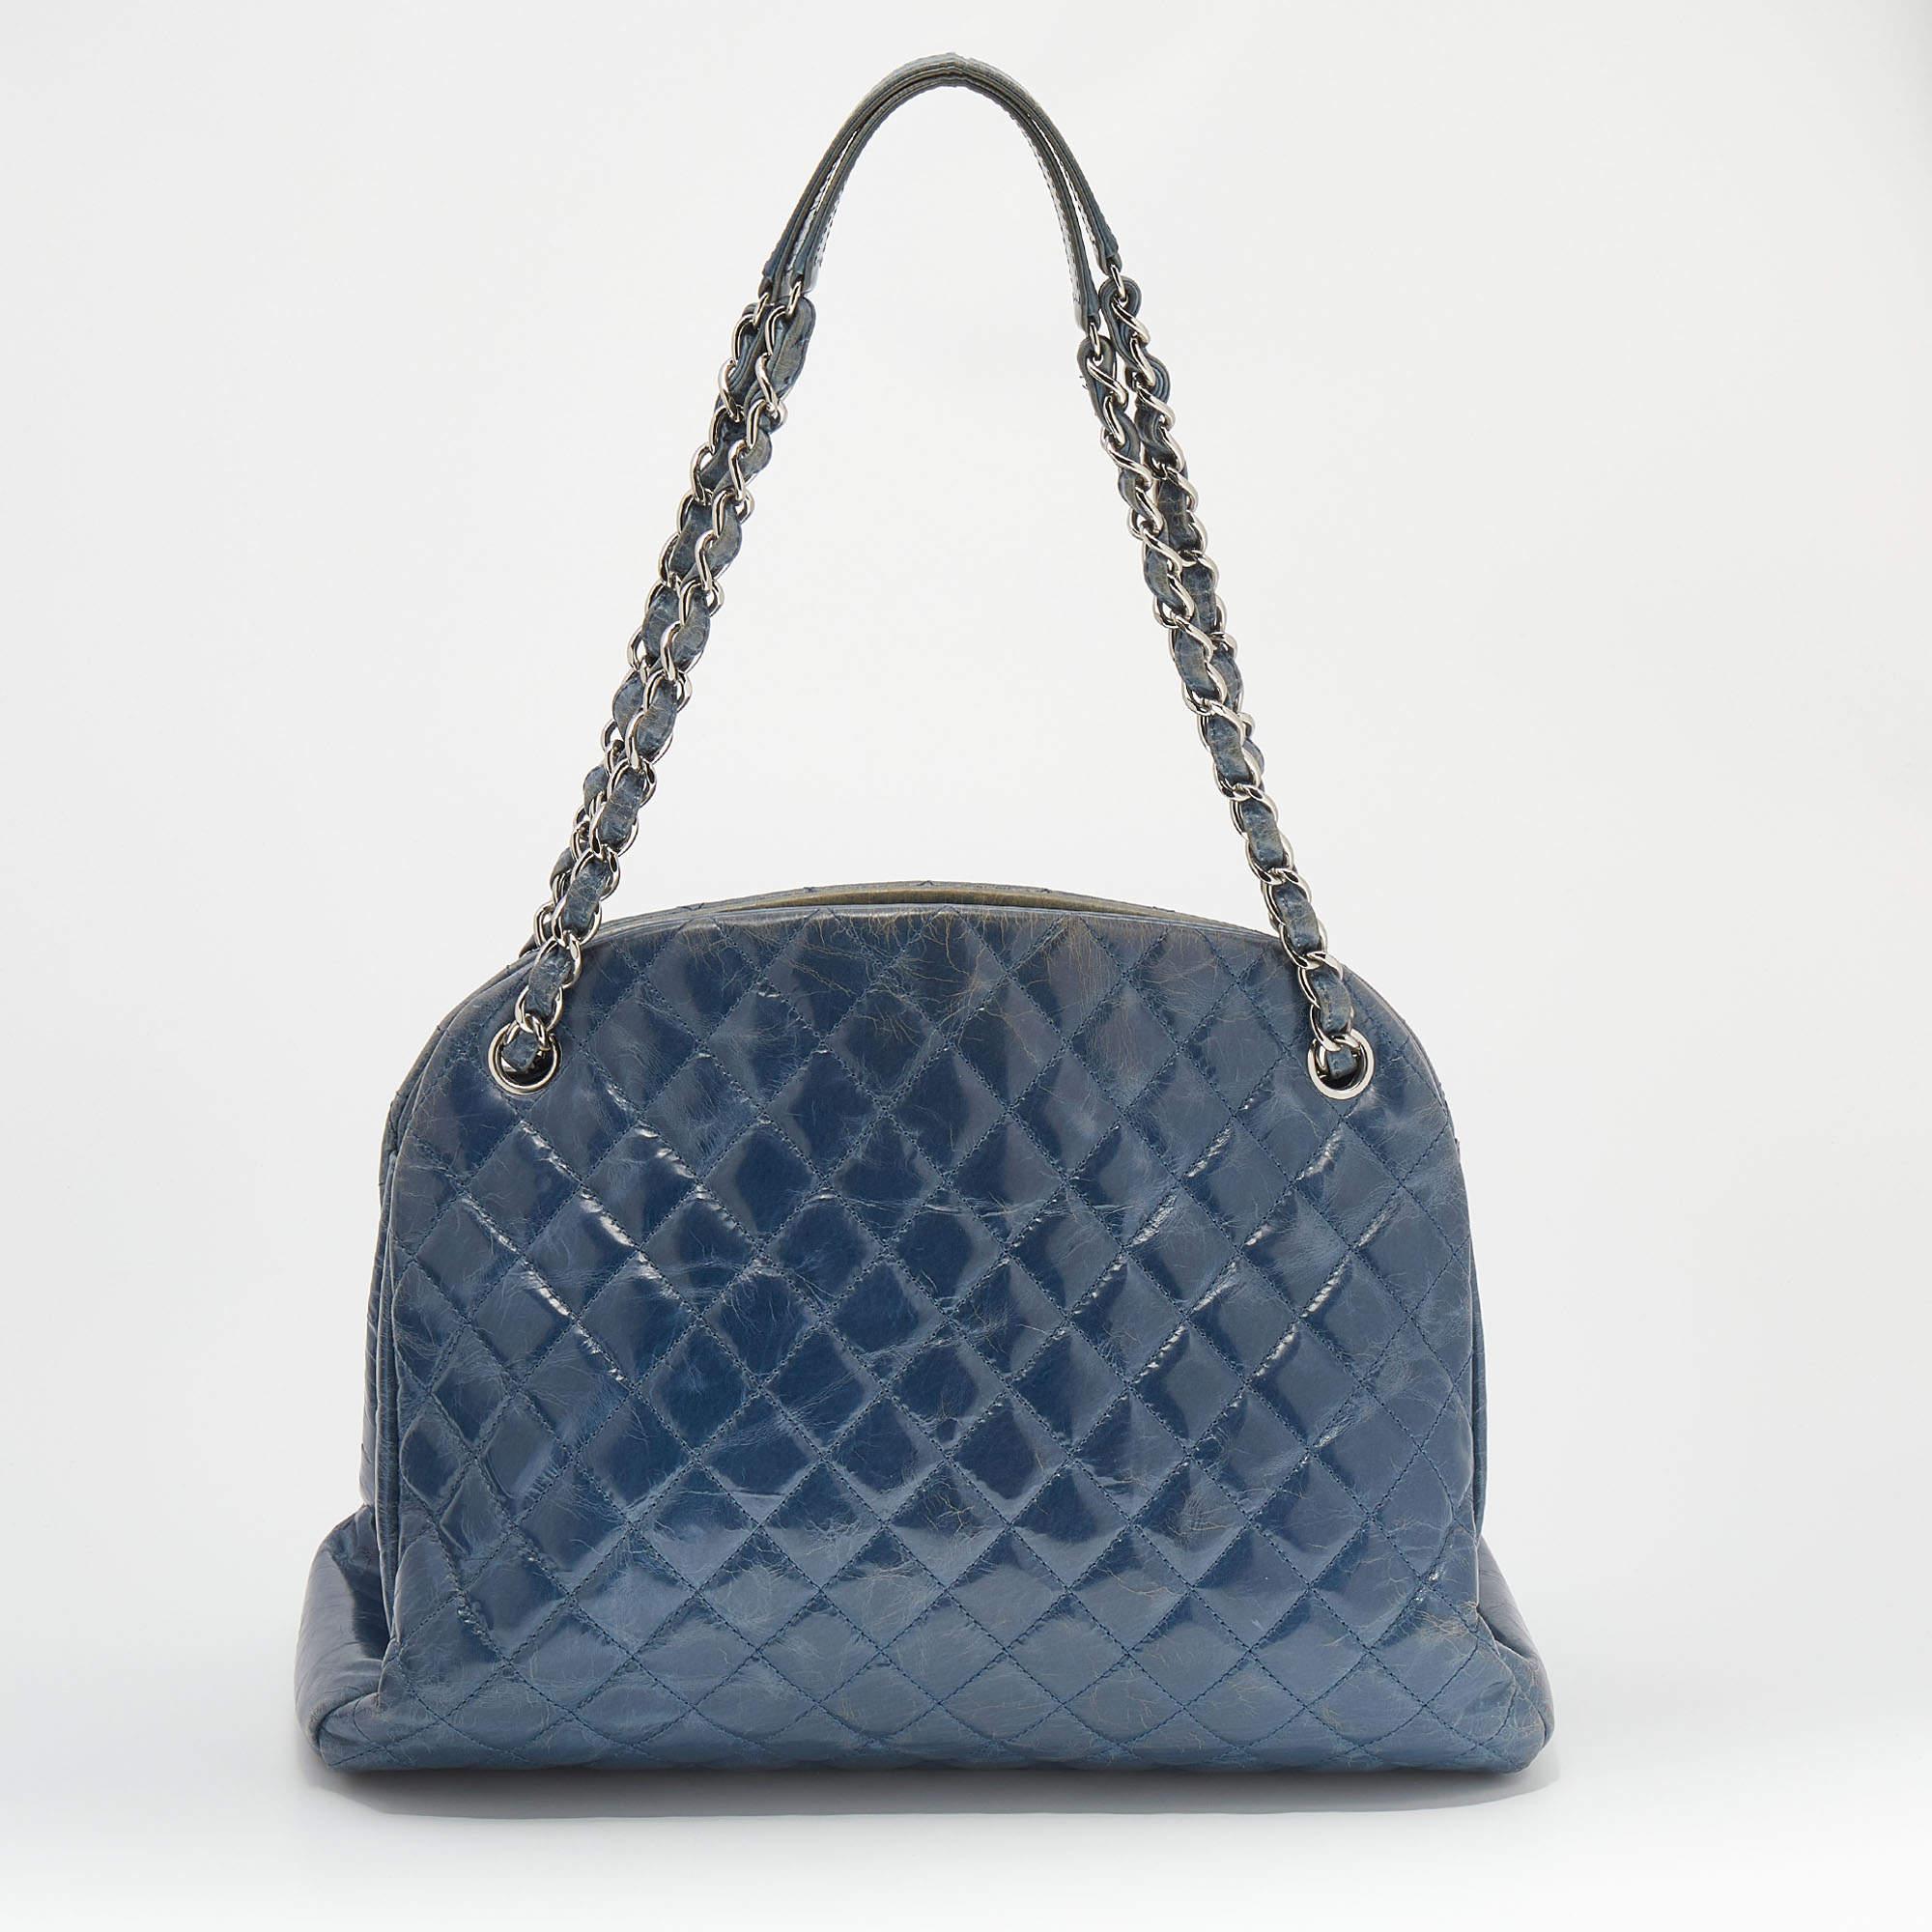 This Just Mademoiselle Bowling bag from Chanel is full of charm and elegance. It has been crafted from quilted crackled leather and features a lovely shape and design. It is equipped with two chain handles and a well-sized fabric interior to keep